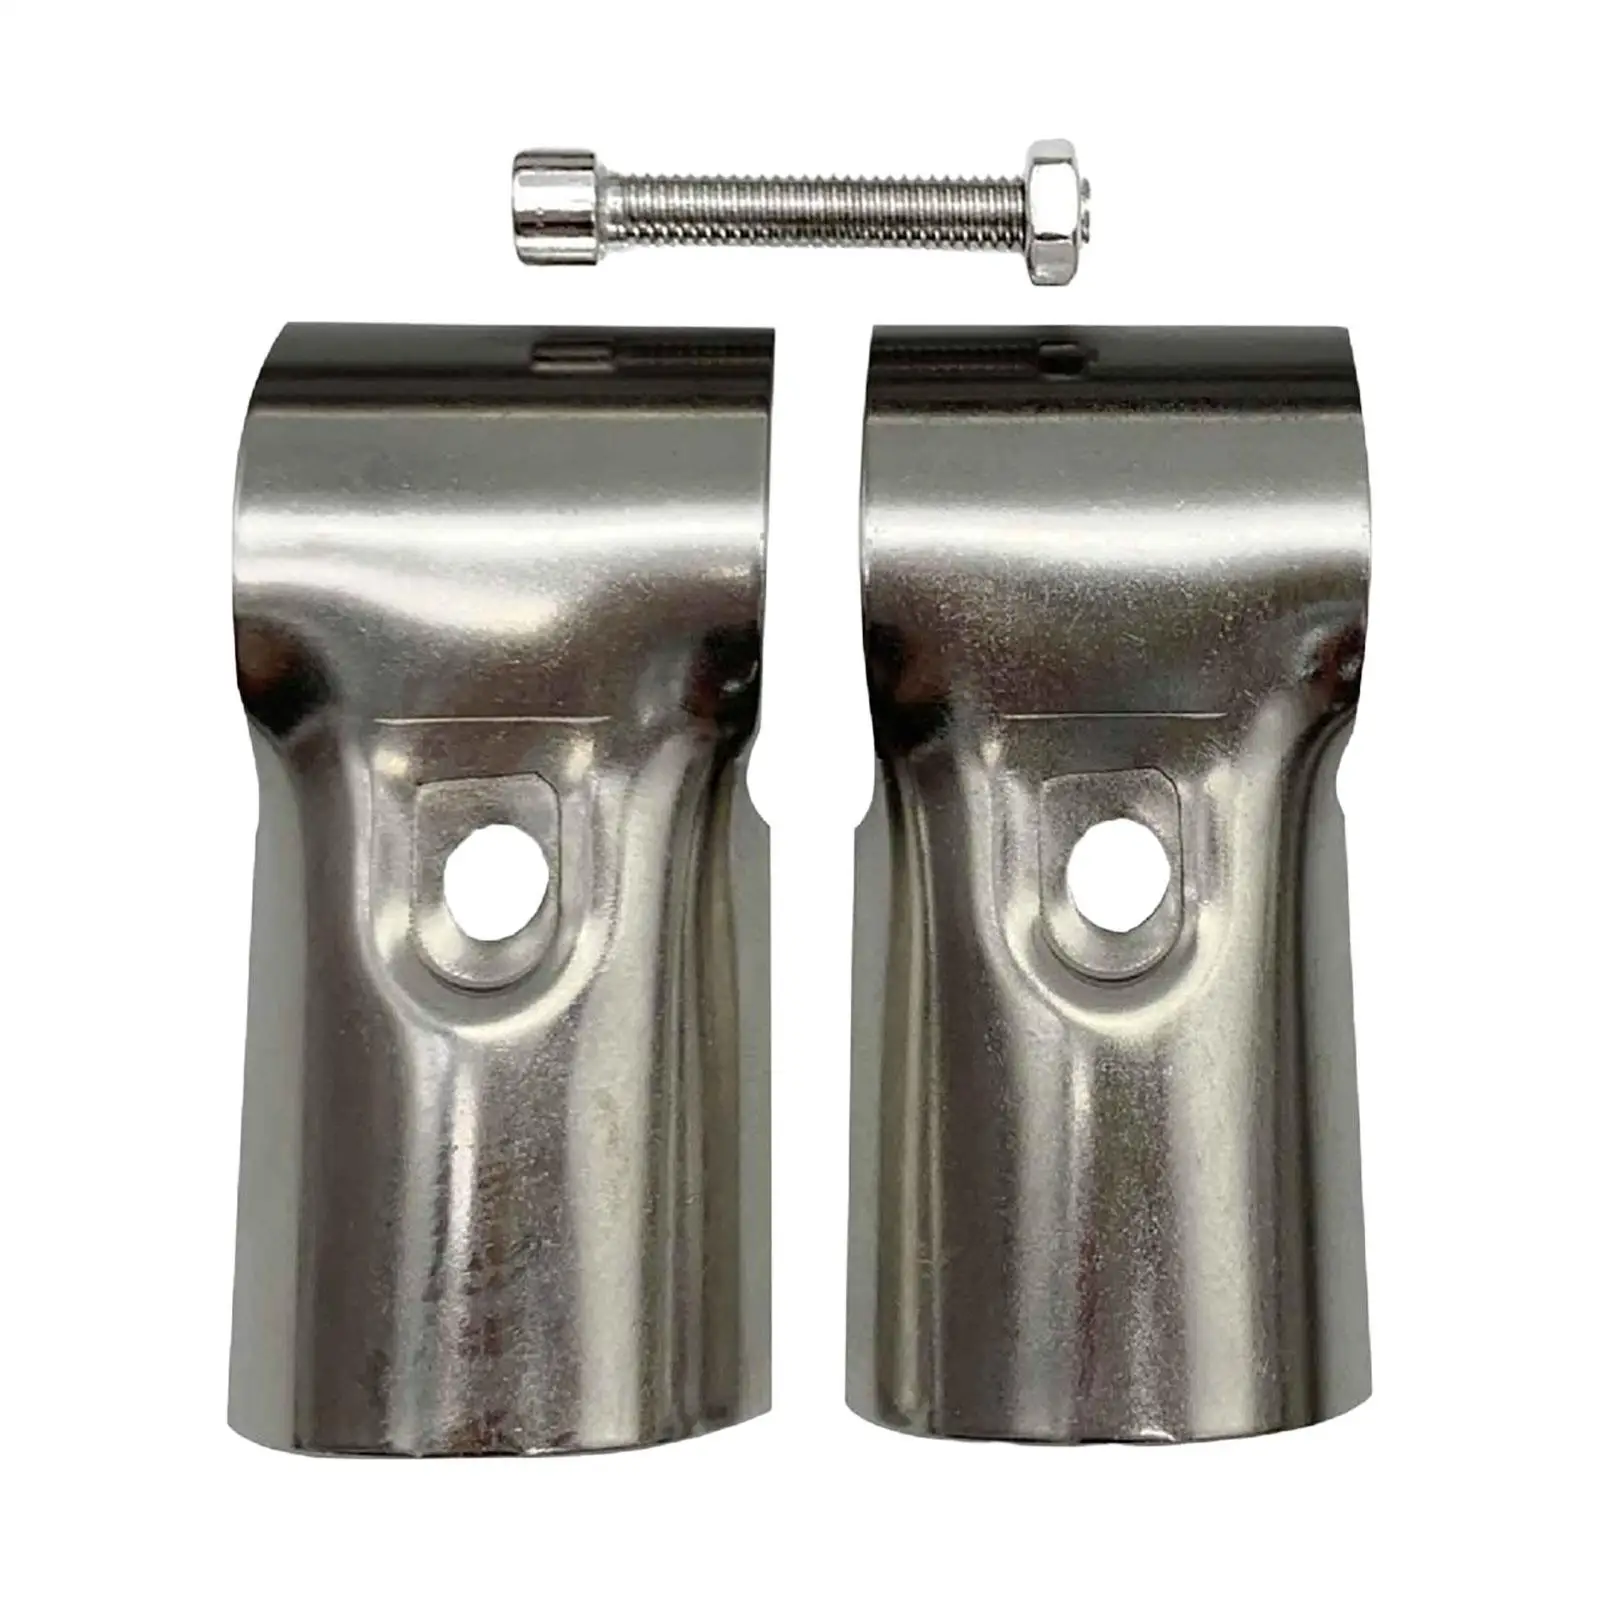 Steel Fence Clamps Chain Link Clamps Fittings Hardware Connector End Rail T Clamps Panel Clamps for Fence